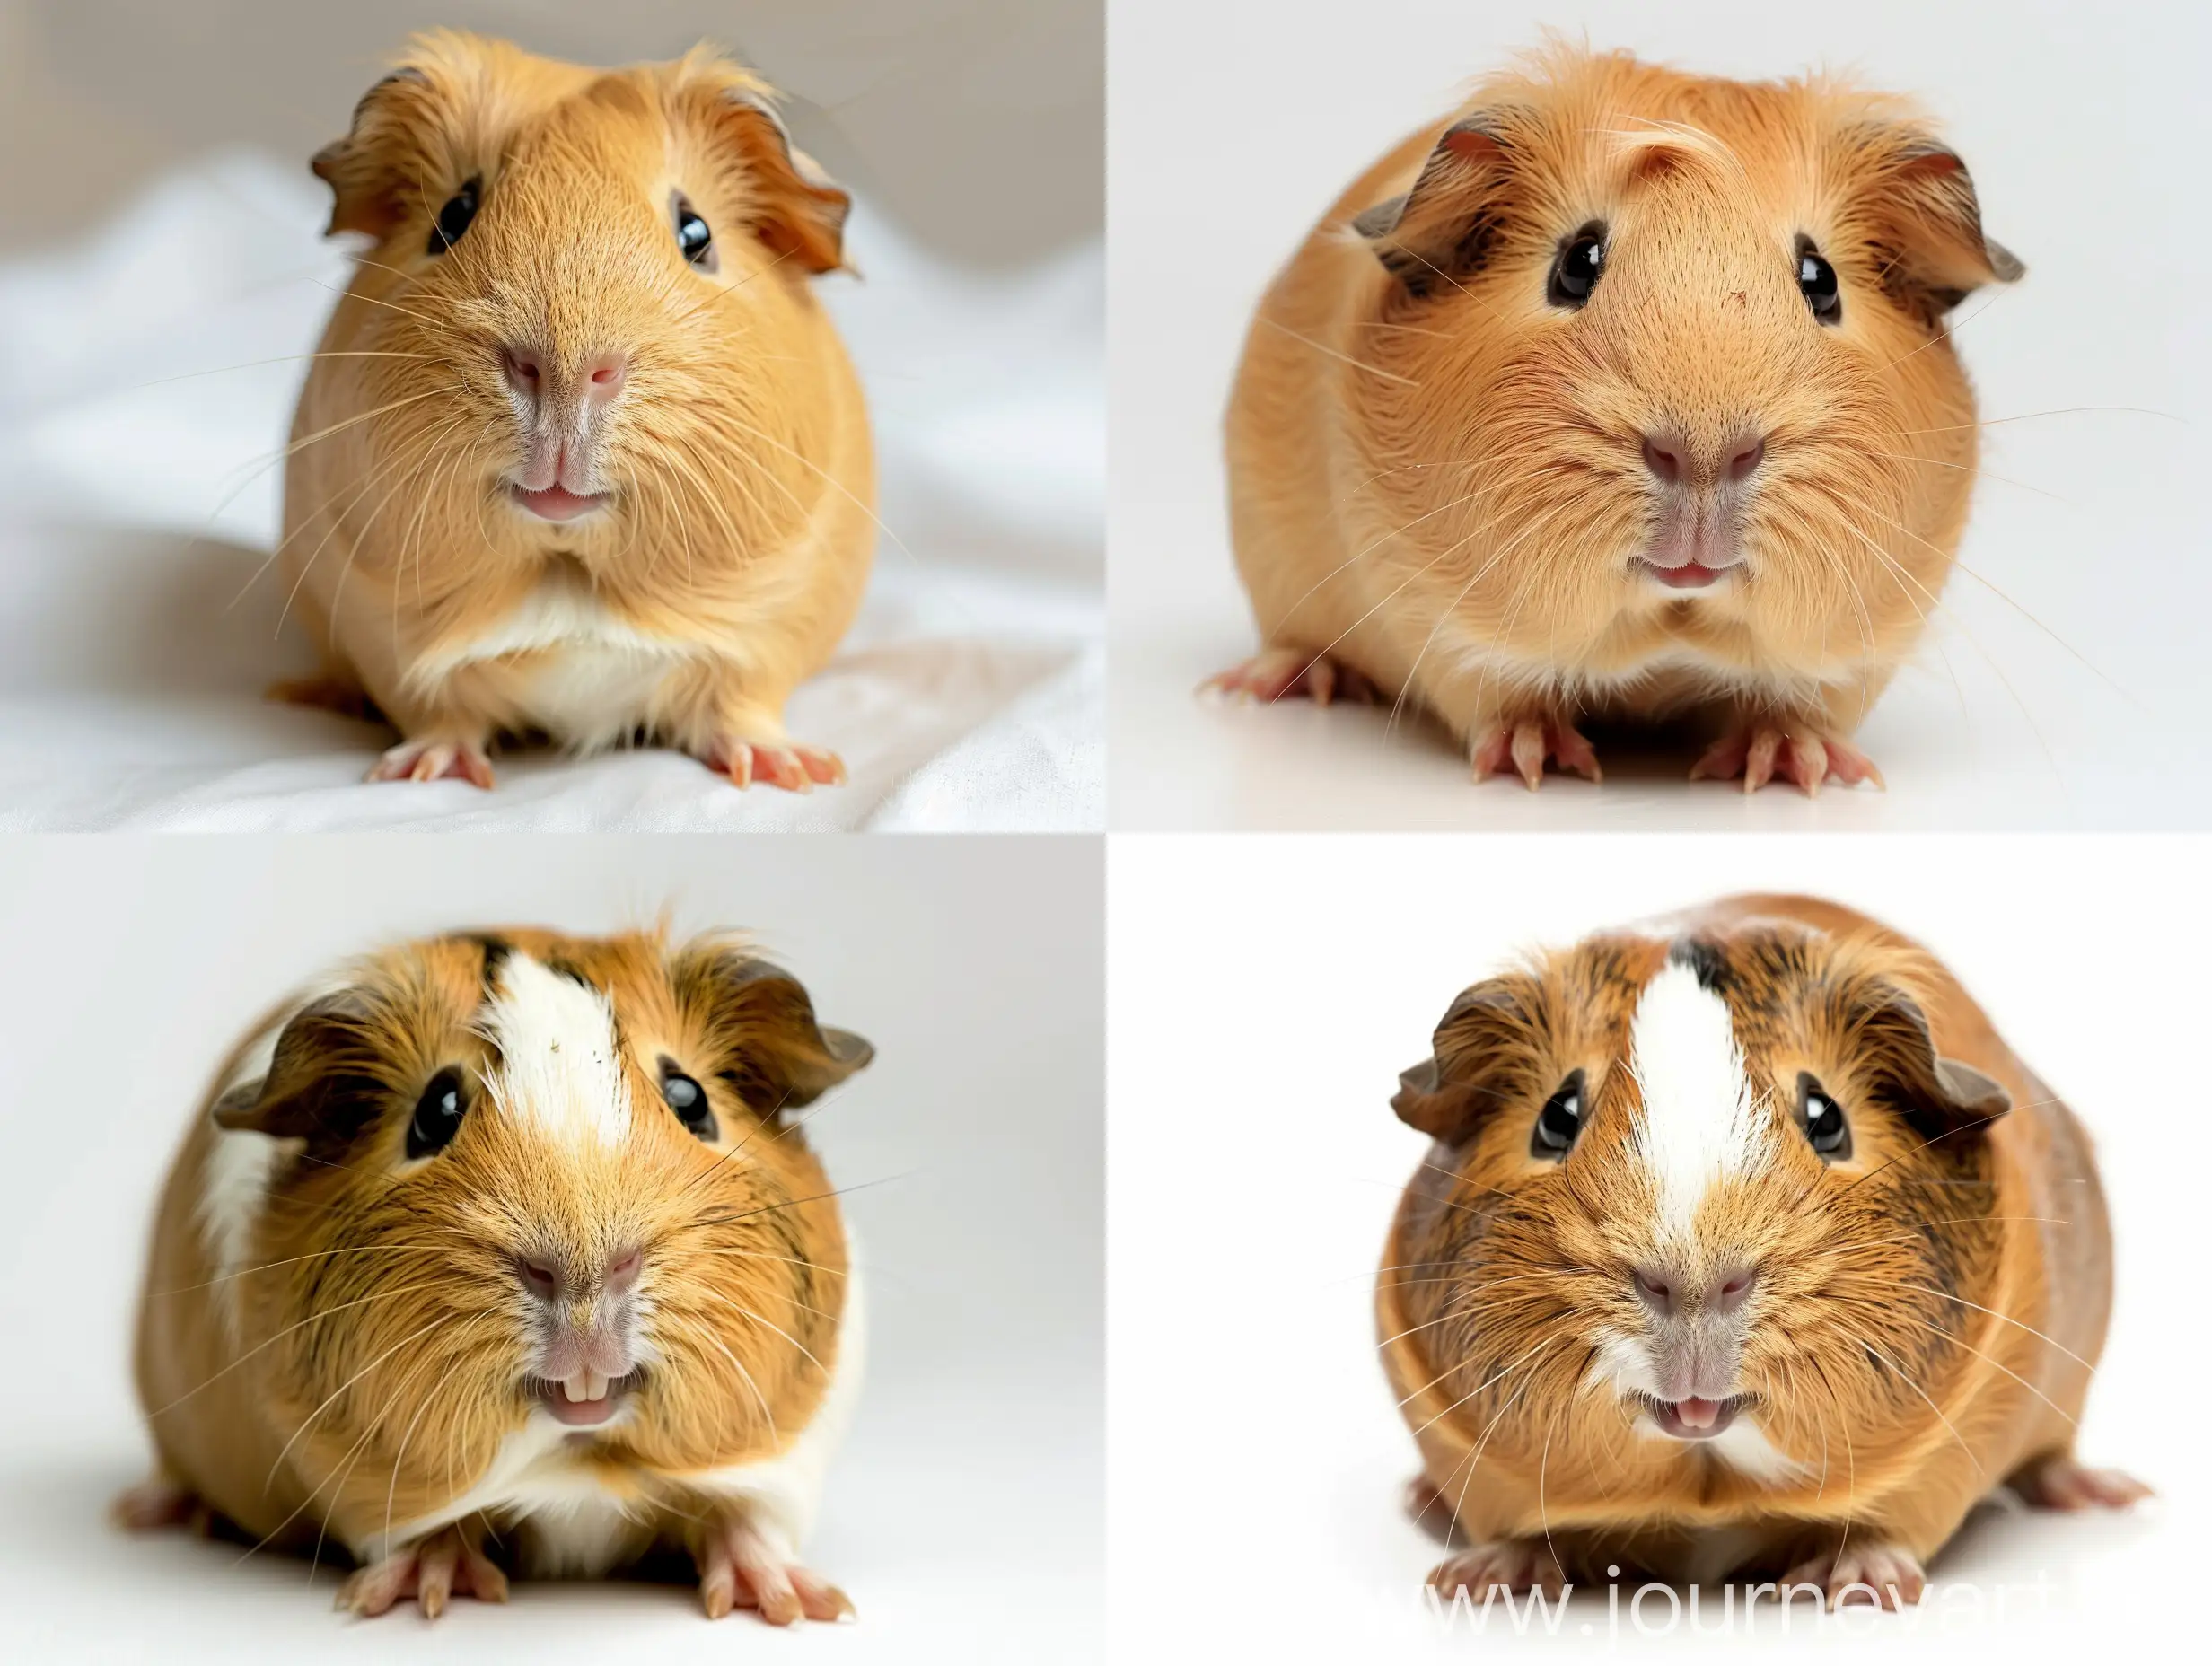 Adorable-Guinea-Pig-Grinning-on-a-Pure-White-Background